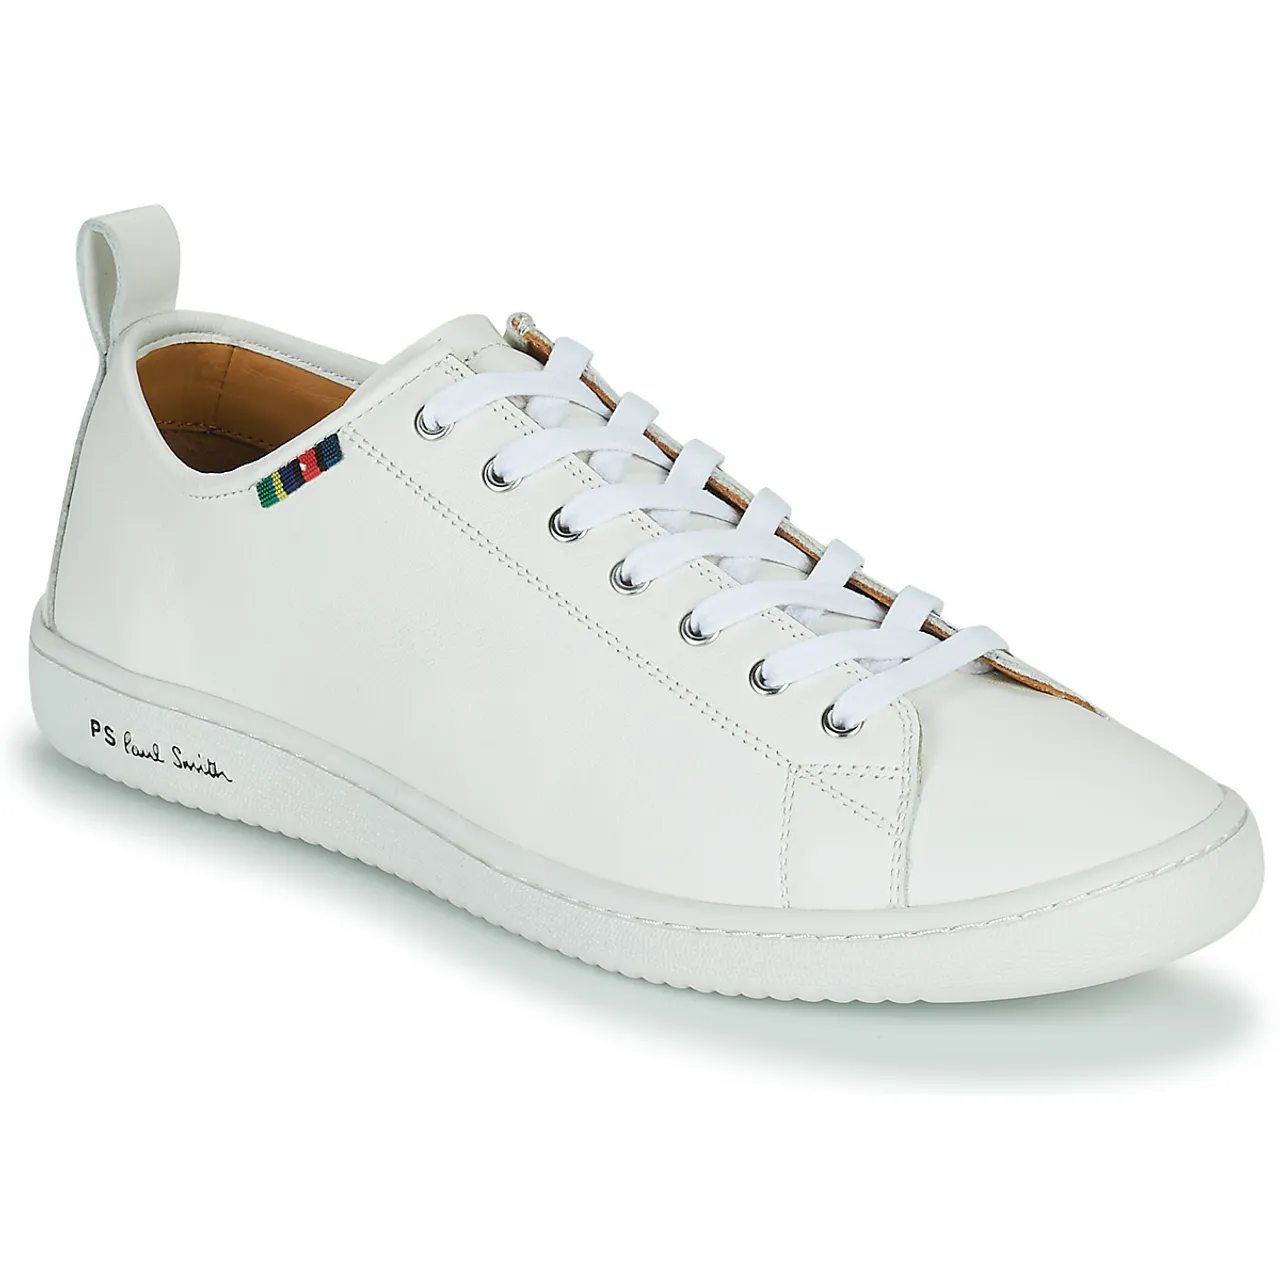 Paul Smith  MIYATA  men's Shoes (Trainers) in White